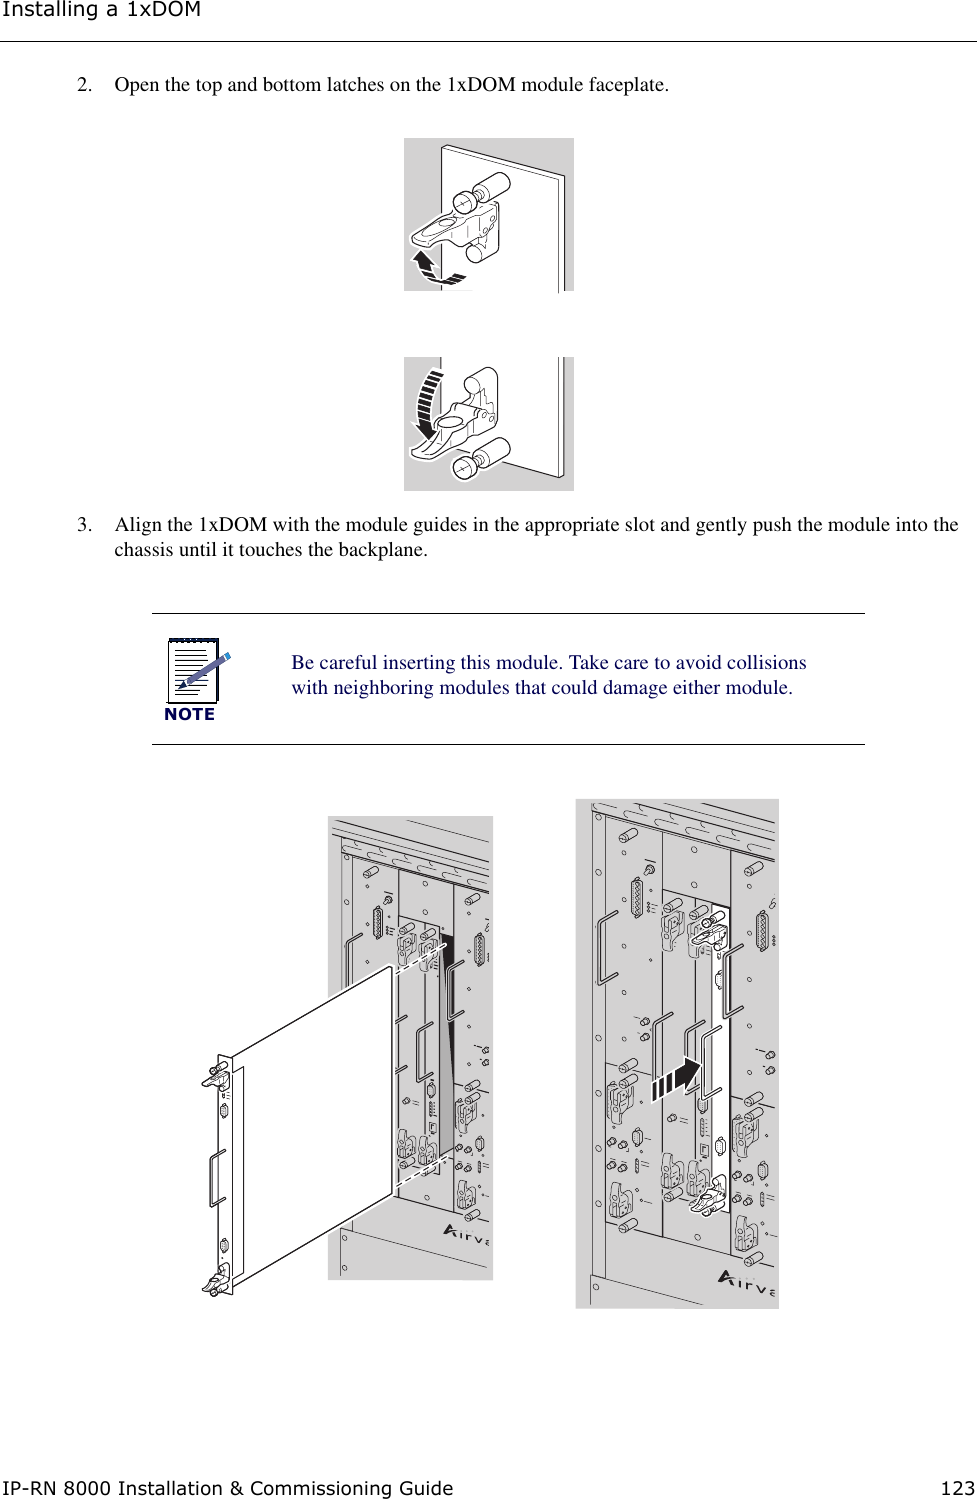 Installing a 1xDOMIP-RN 8000 Installation &amp; Commissioning Guide 1232. Open the top and bottom latches on the 1xDOM module faceplate. 3. Align the 1xDOM with the module guides in the appropriate slot and gently push the module into the chassis until it touches the backplane.NOTEBe careful inserting this module. Take care to avoid collisions with neighboring modules that could damage either module.BIO/SC